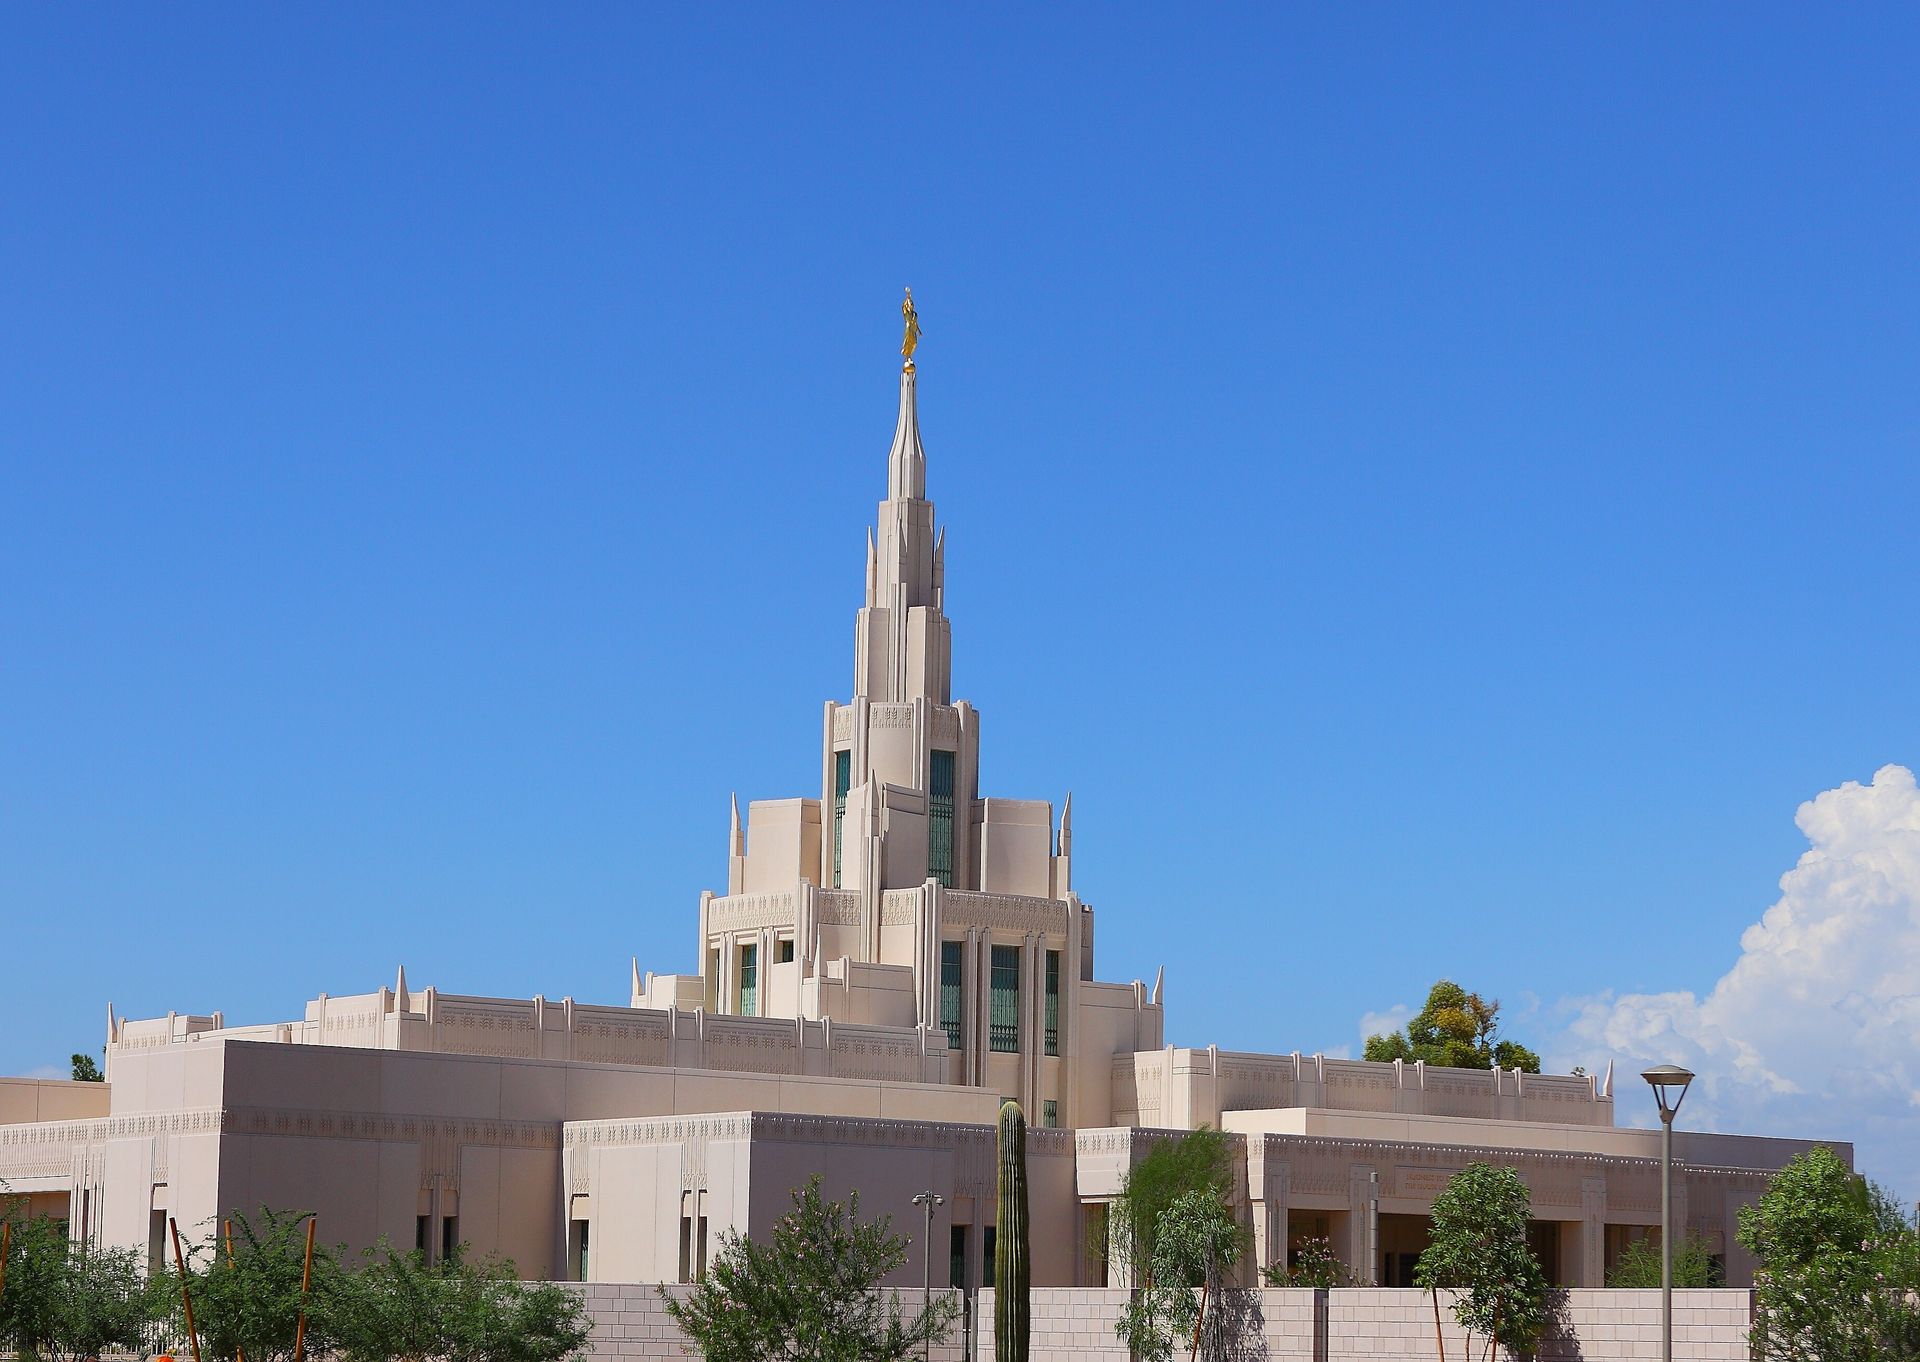 A view of the Phoenix Arizona Temple during the day.